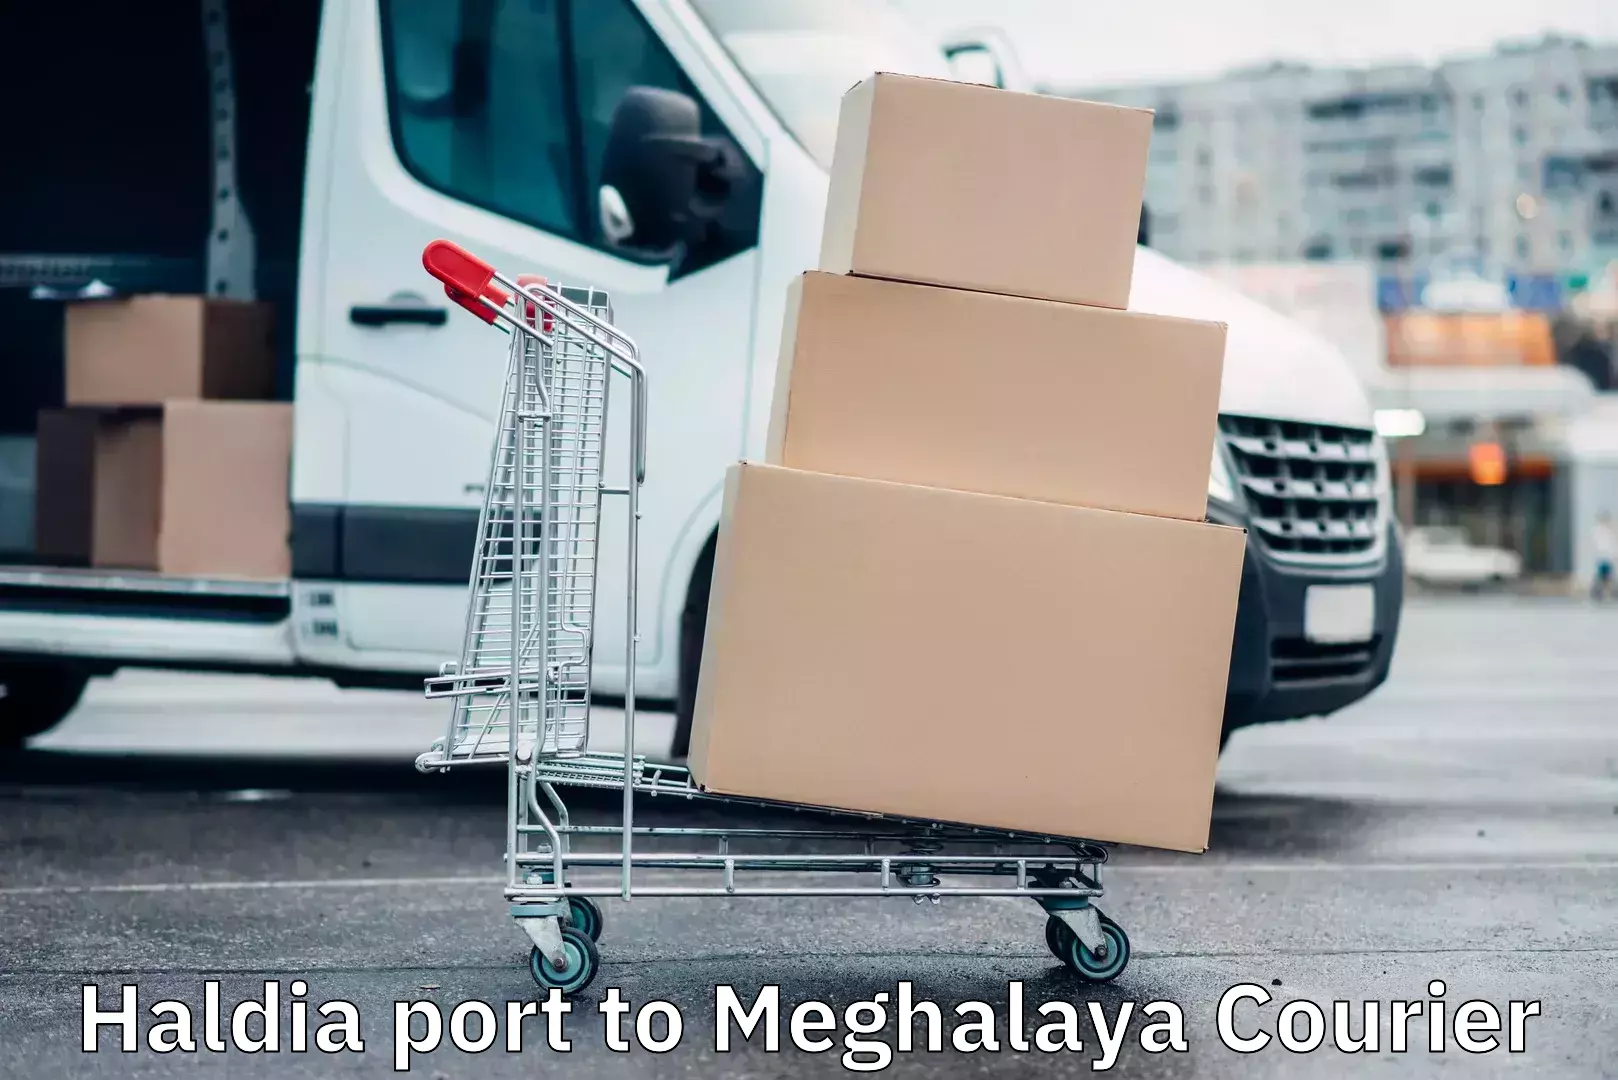 Corporate courier solutions in Haldia port to Meghalaya